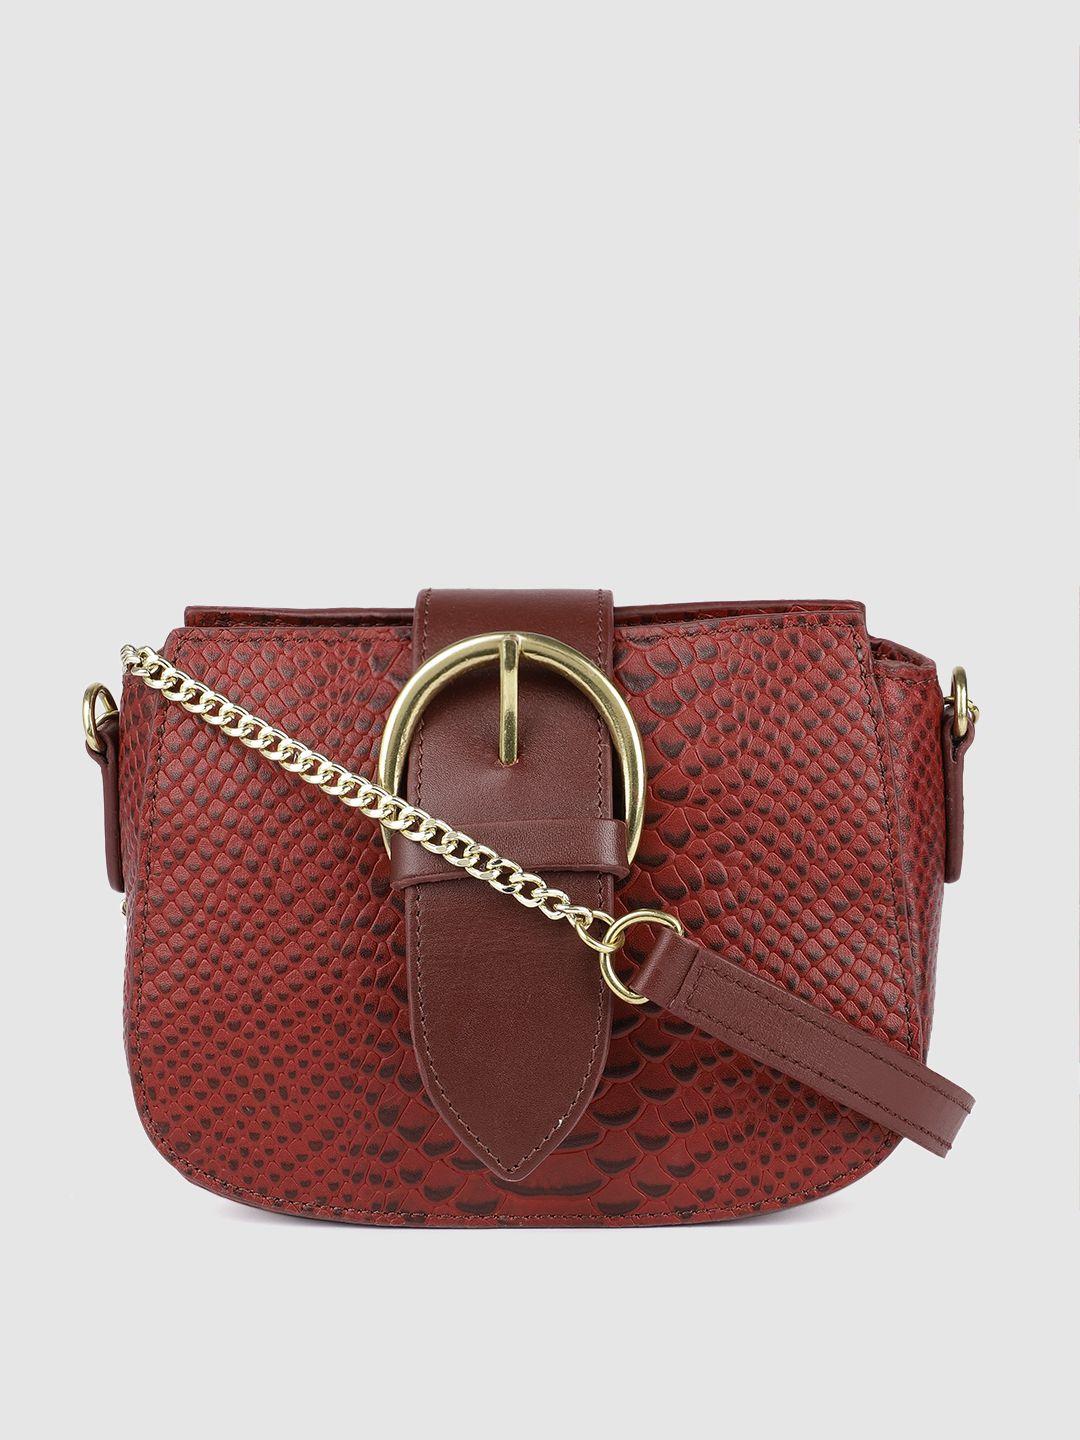 hidesign red textured leather structured sling bag